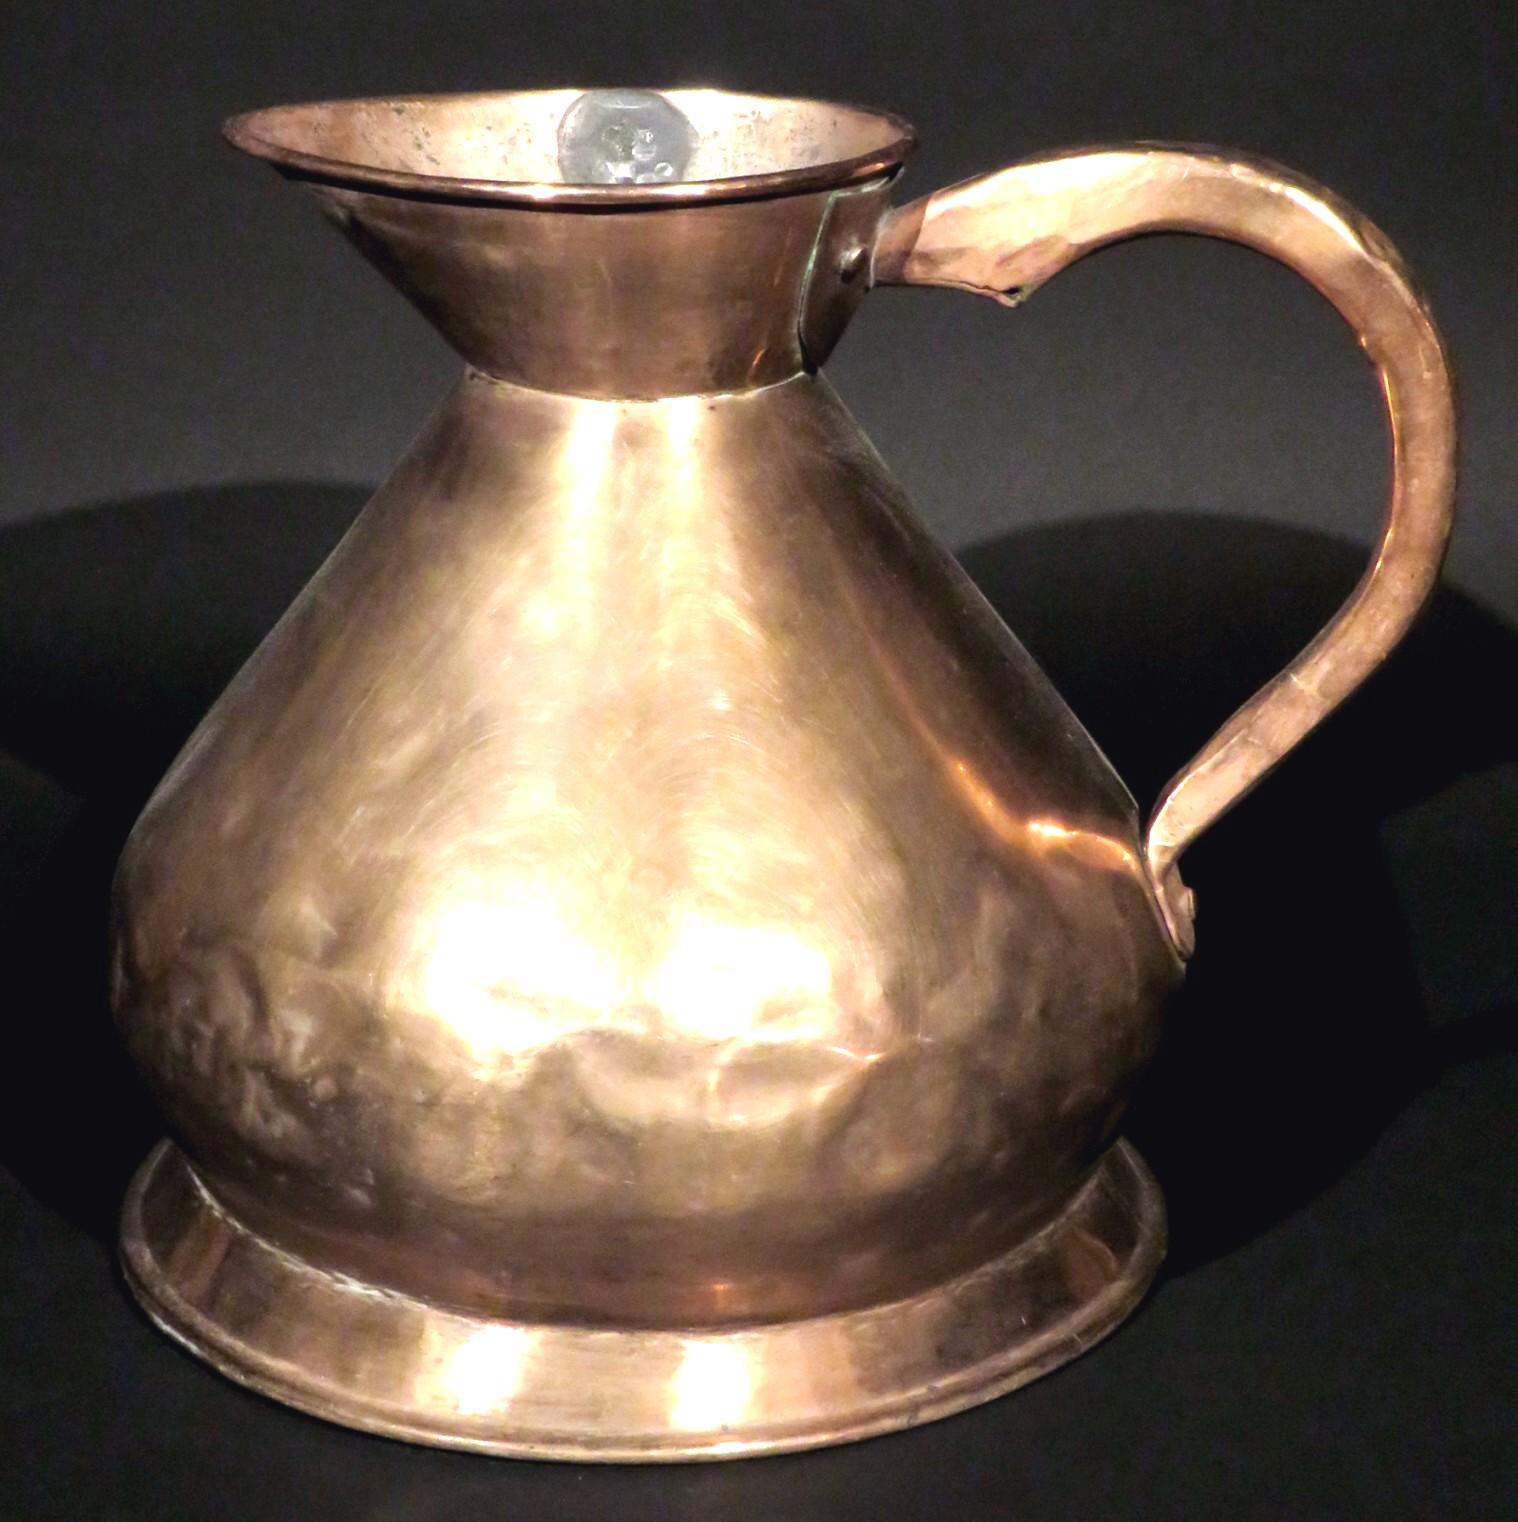 A very large two gallon copper haystack-shaped measure / ale pitcher of dovetailed construction, rising to a flaring and elongated spout inset with its lead seal noting volume, maker etc. The body fitted with a riveted handle and raised overall upon